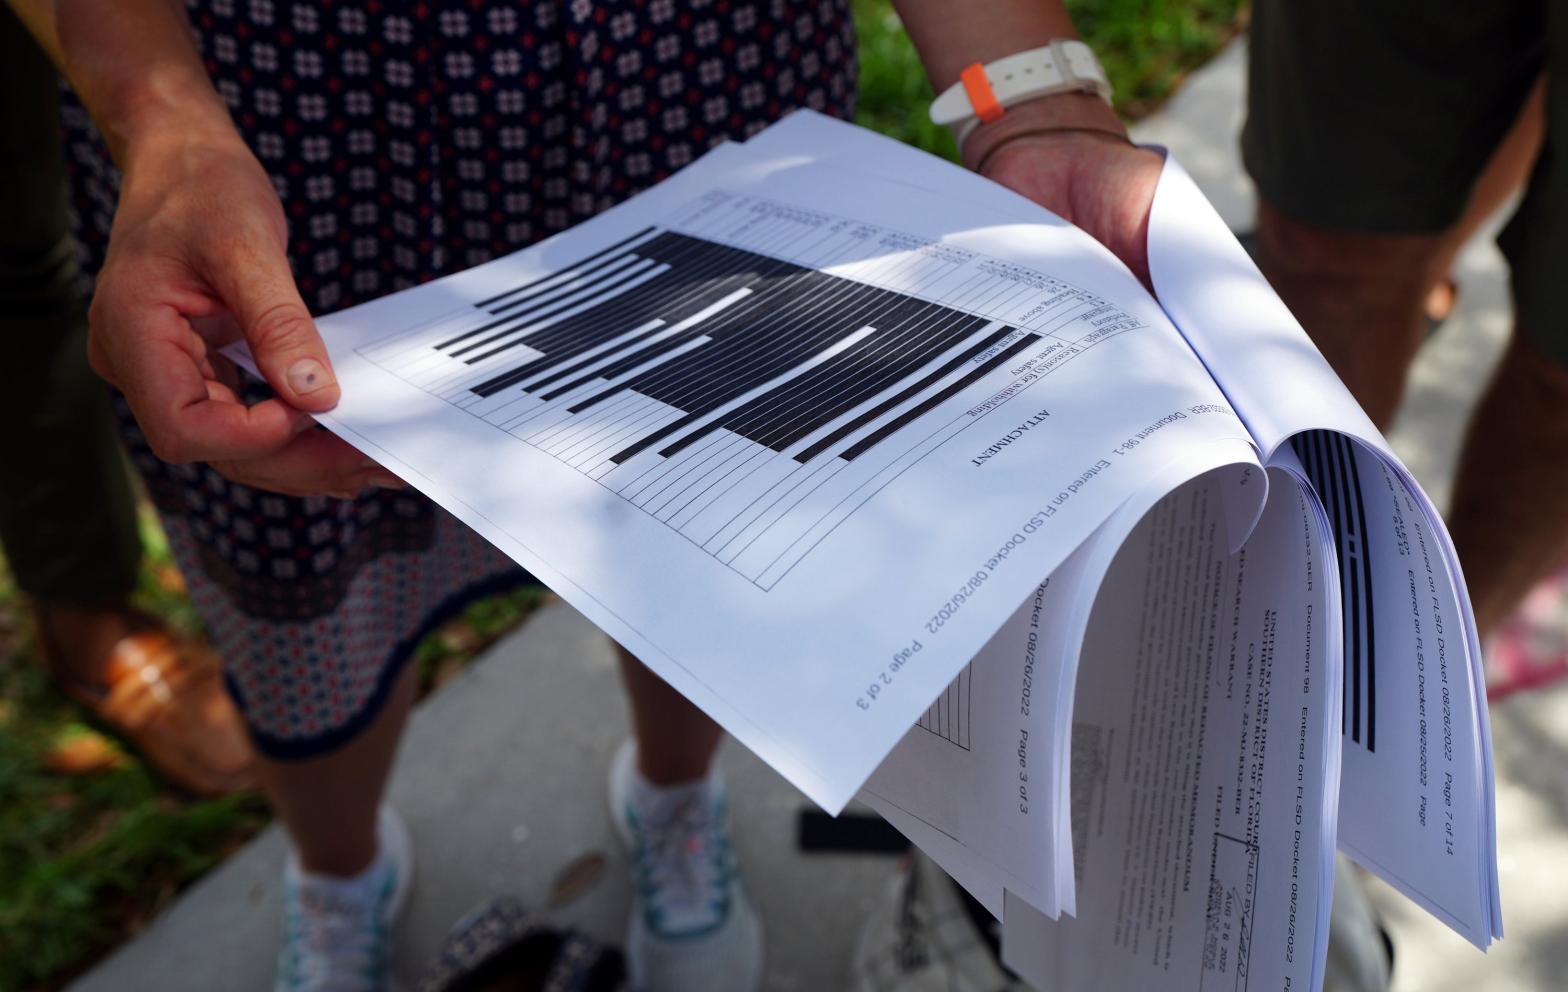 Journalists gather outside the Paul S. Rogers Federal Building and U.S. Courthouse in downtown West Palm Beach, Fla., to read a heavily blackout document released by The Justice Department Friday, Aug. 26, 2022. (Photo: Jim Rassol, AP)